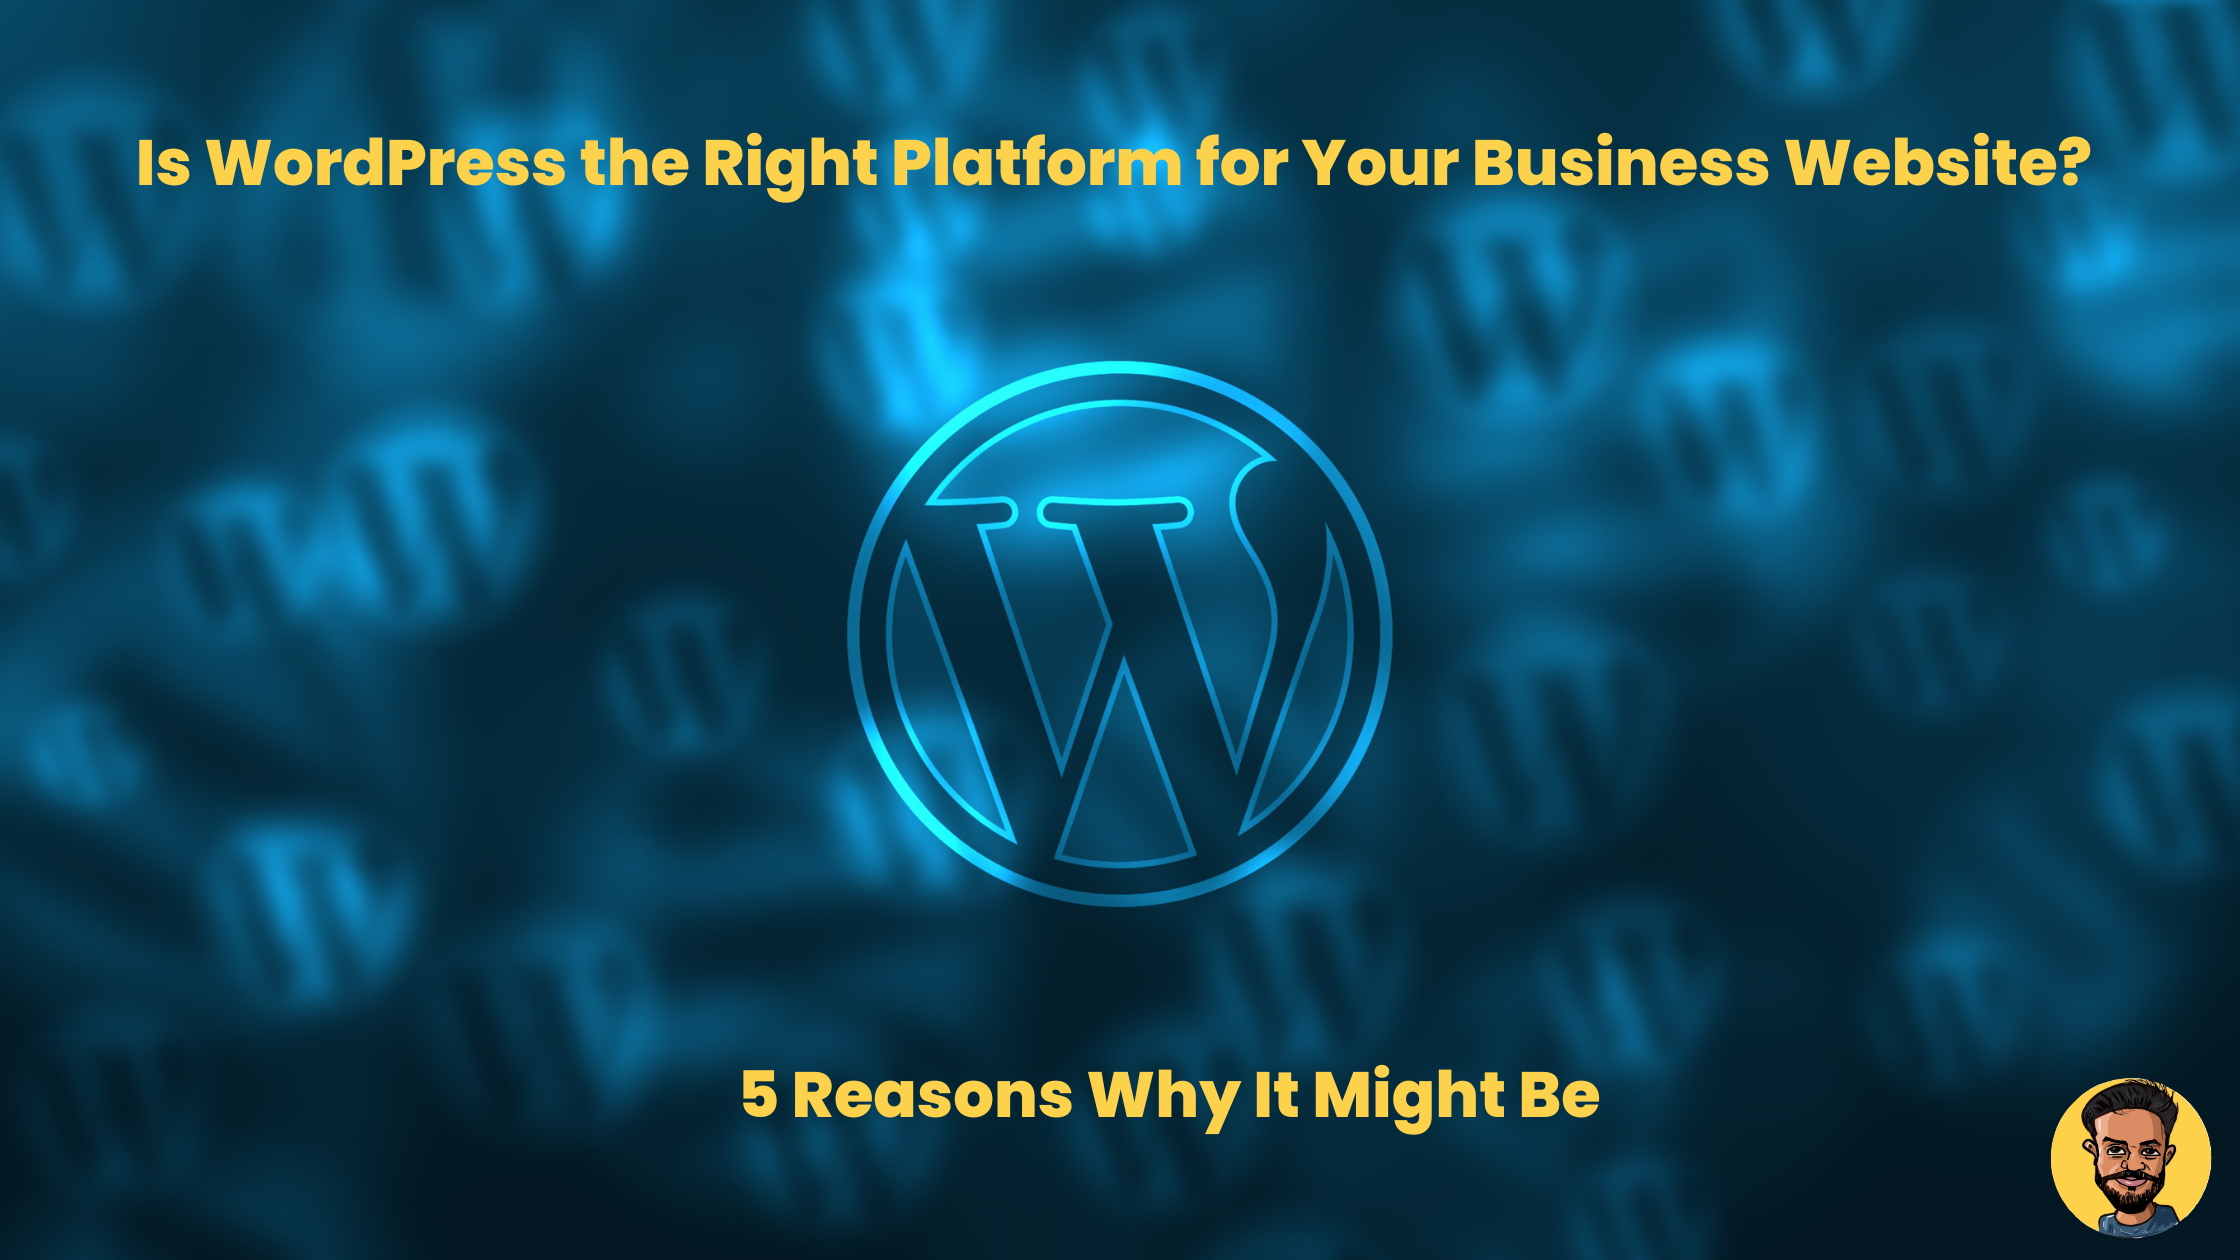 Is WordPress the Right Platform for Your Business Website? 5 Reasons Why It Might Be